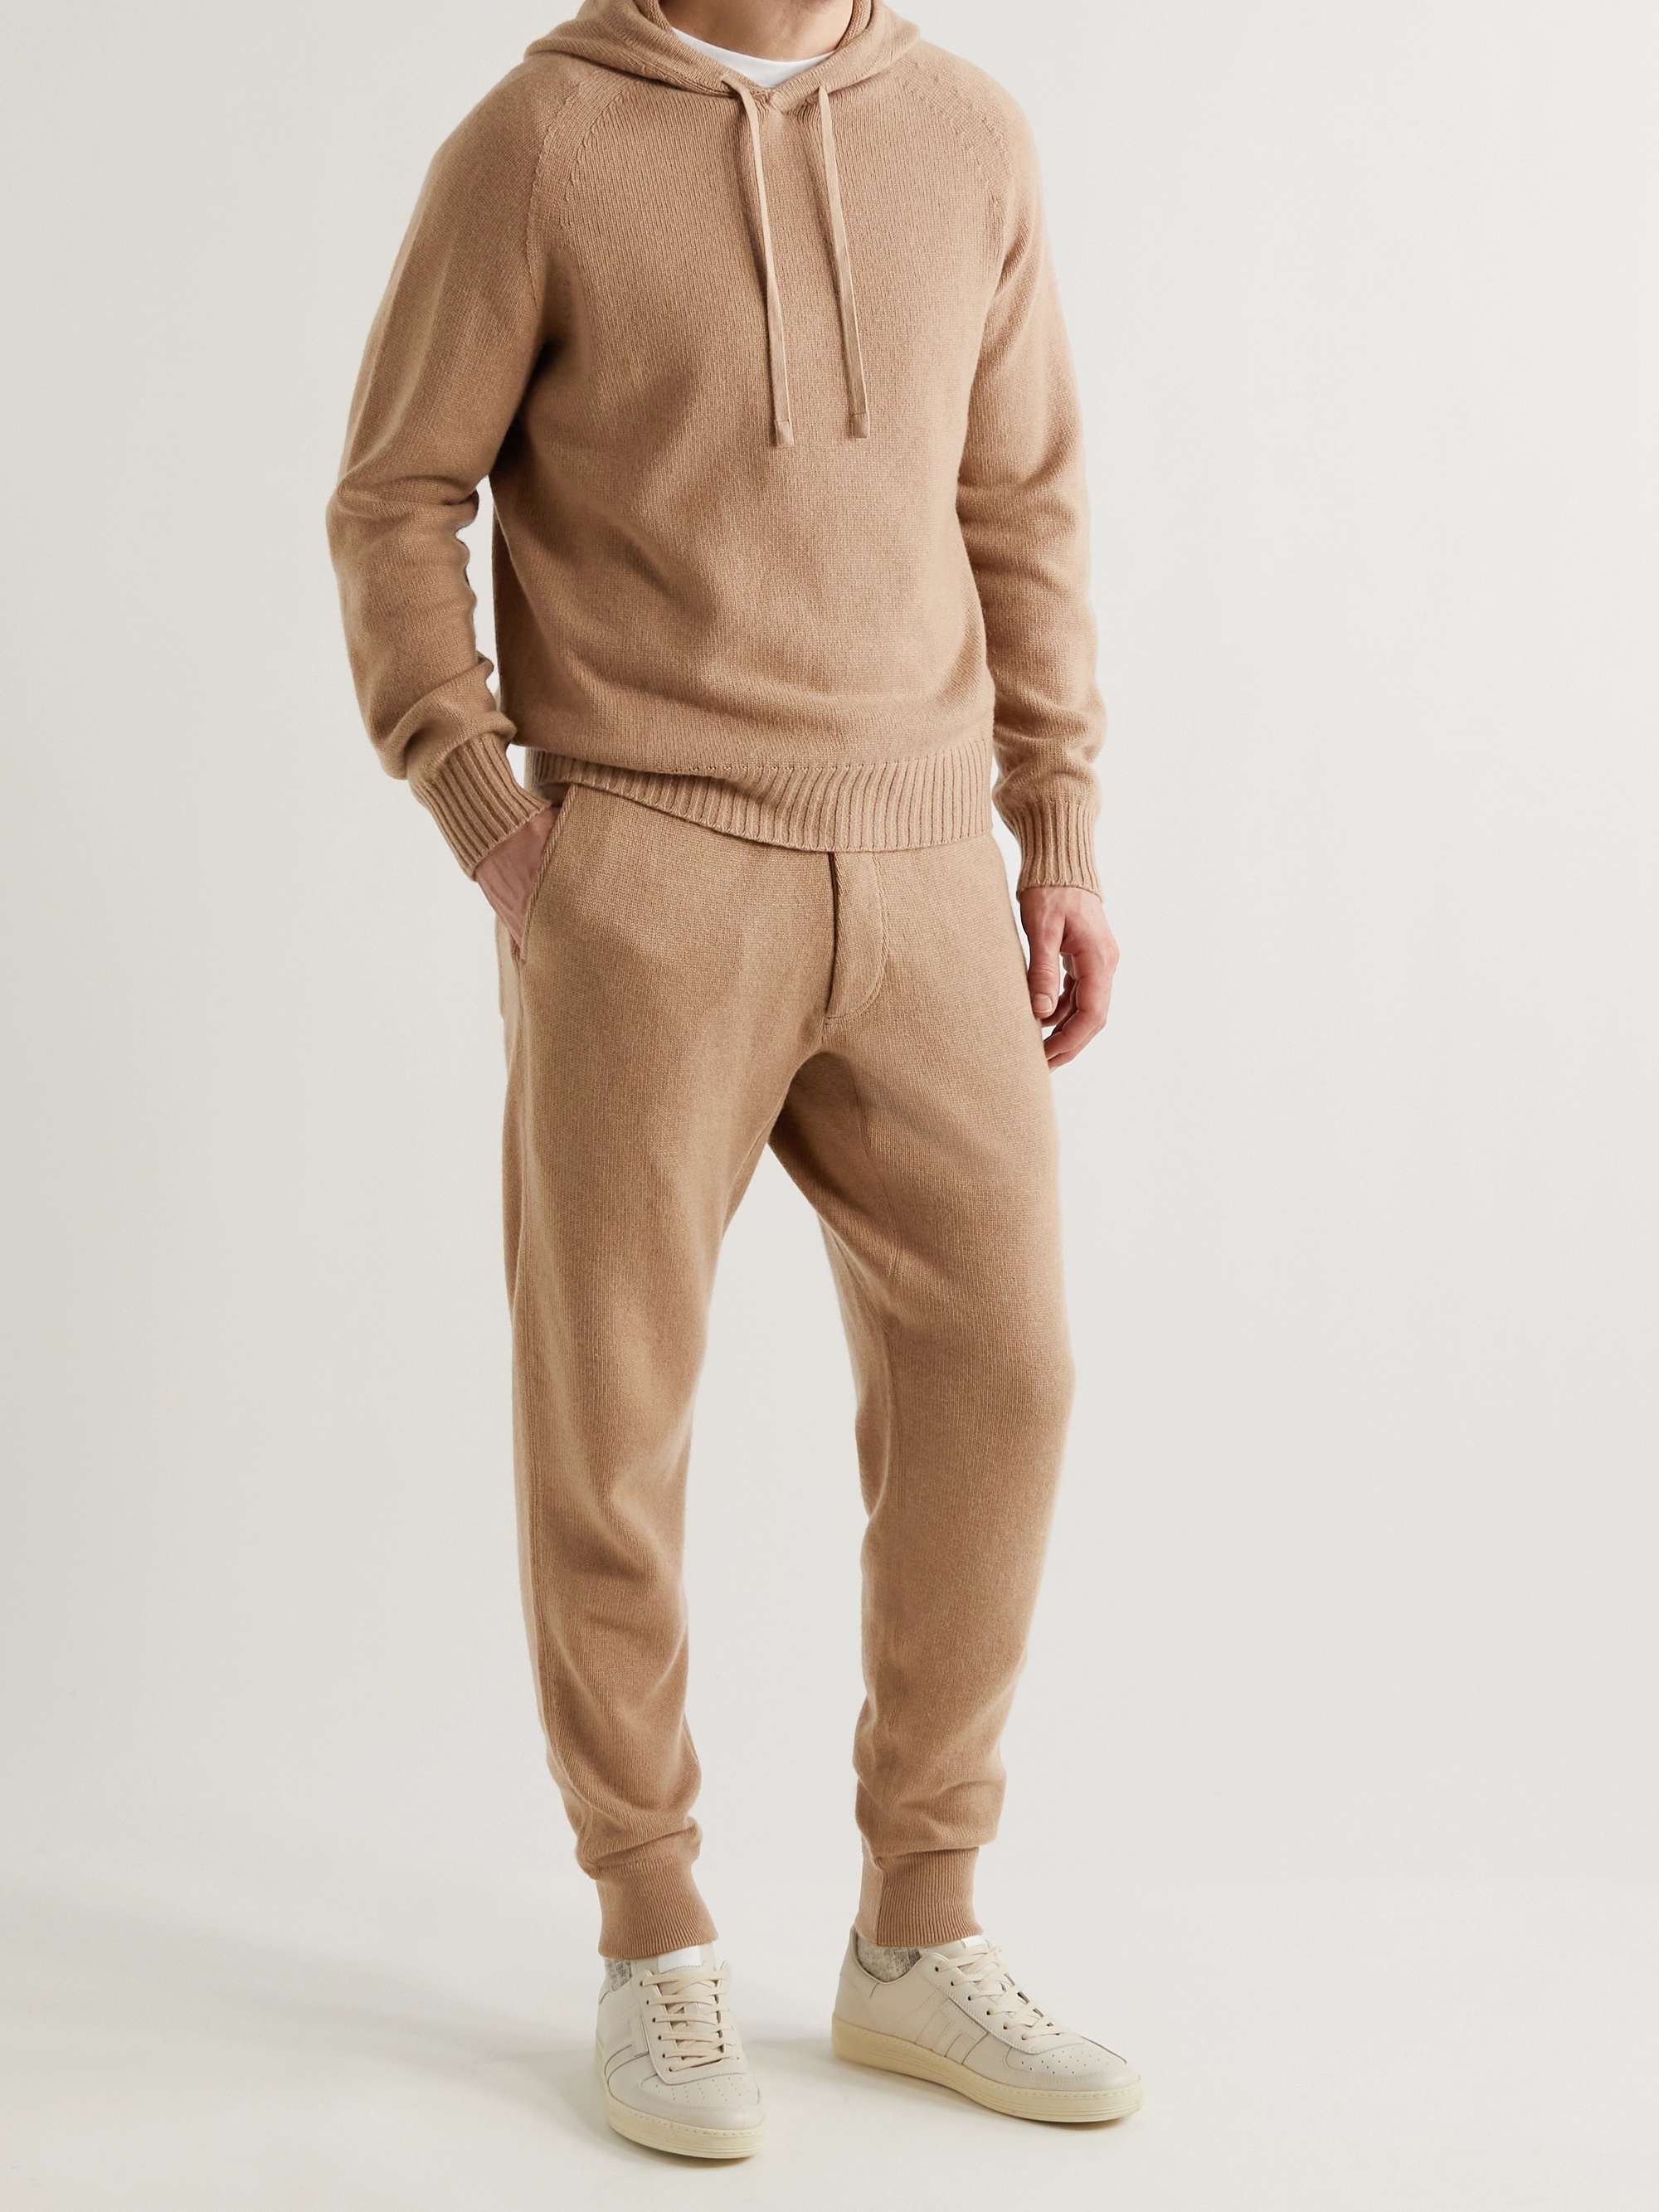 TOM FORD Tapered Cashmere Sweatpants